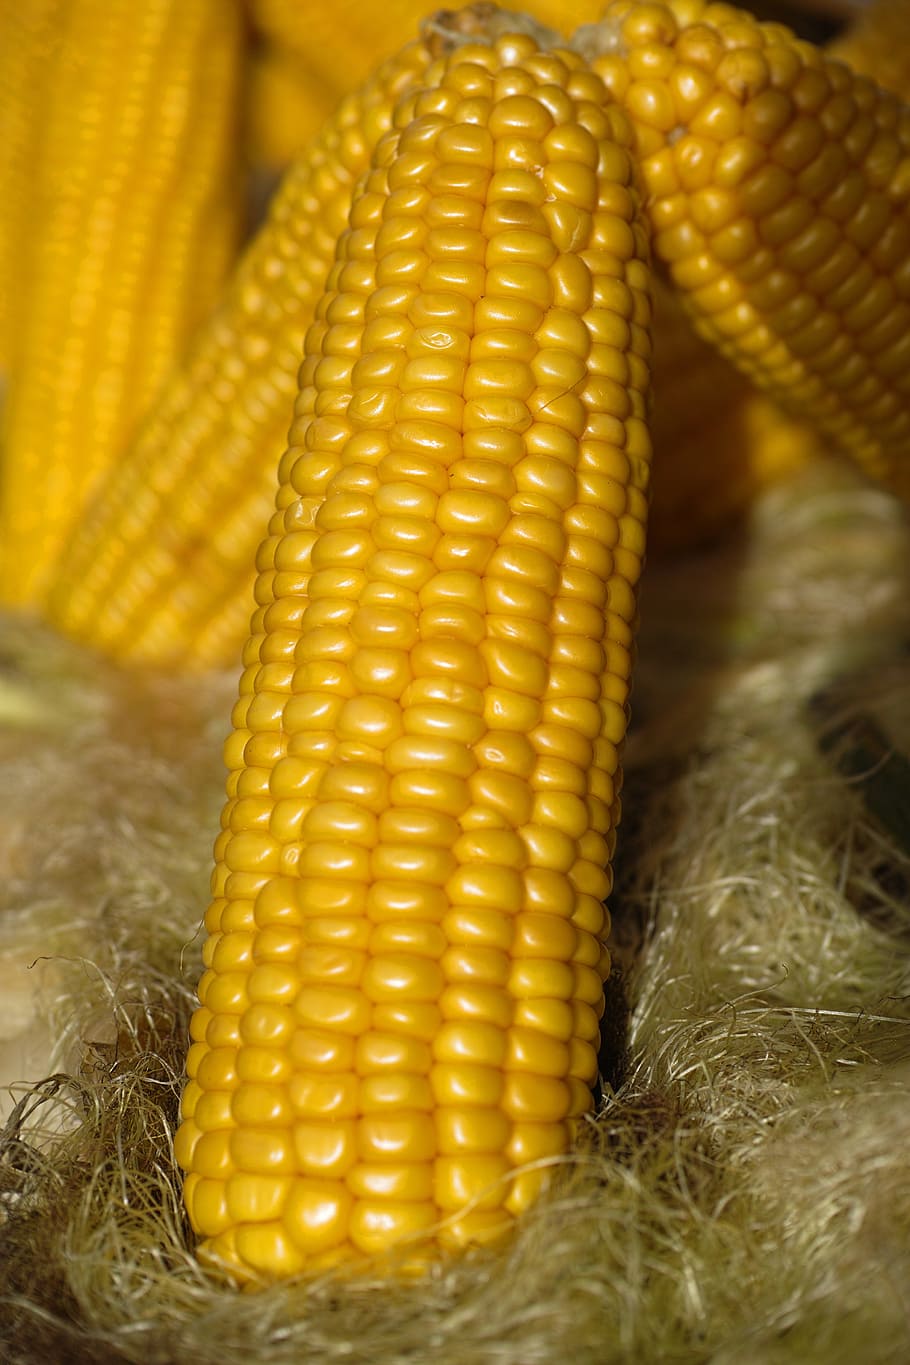 corn cobs, egypt, baked, grill, roasted, yellow, one, detail